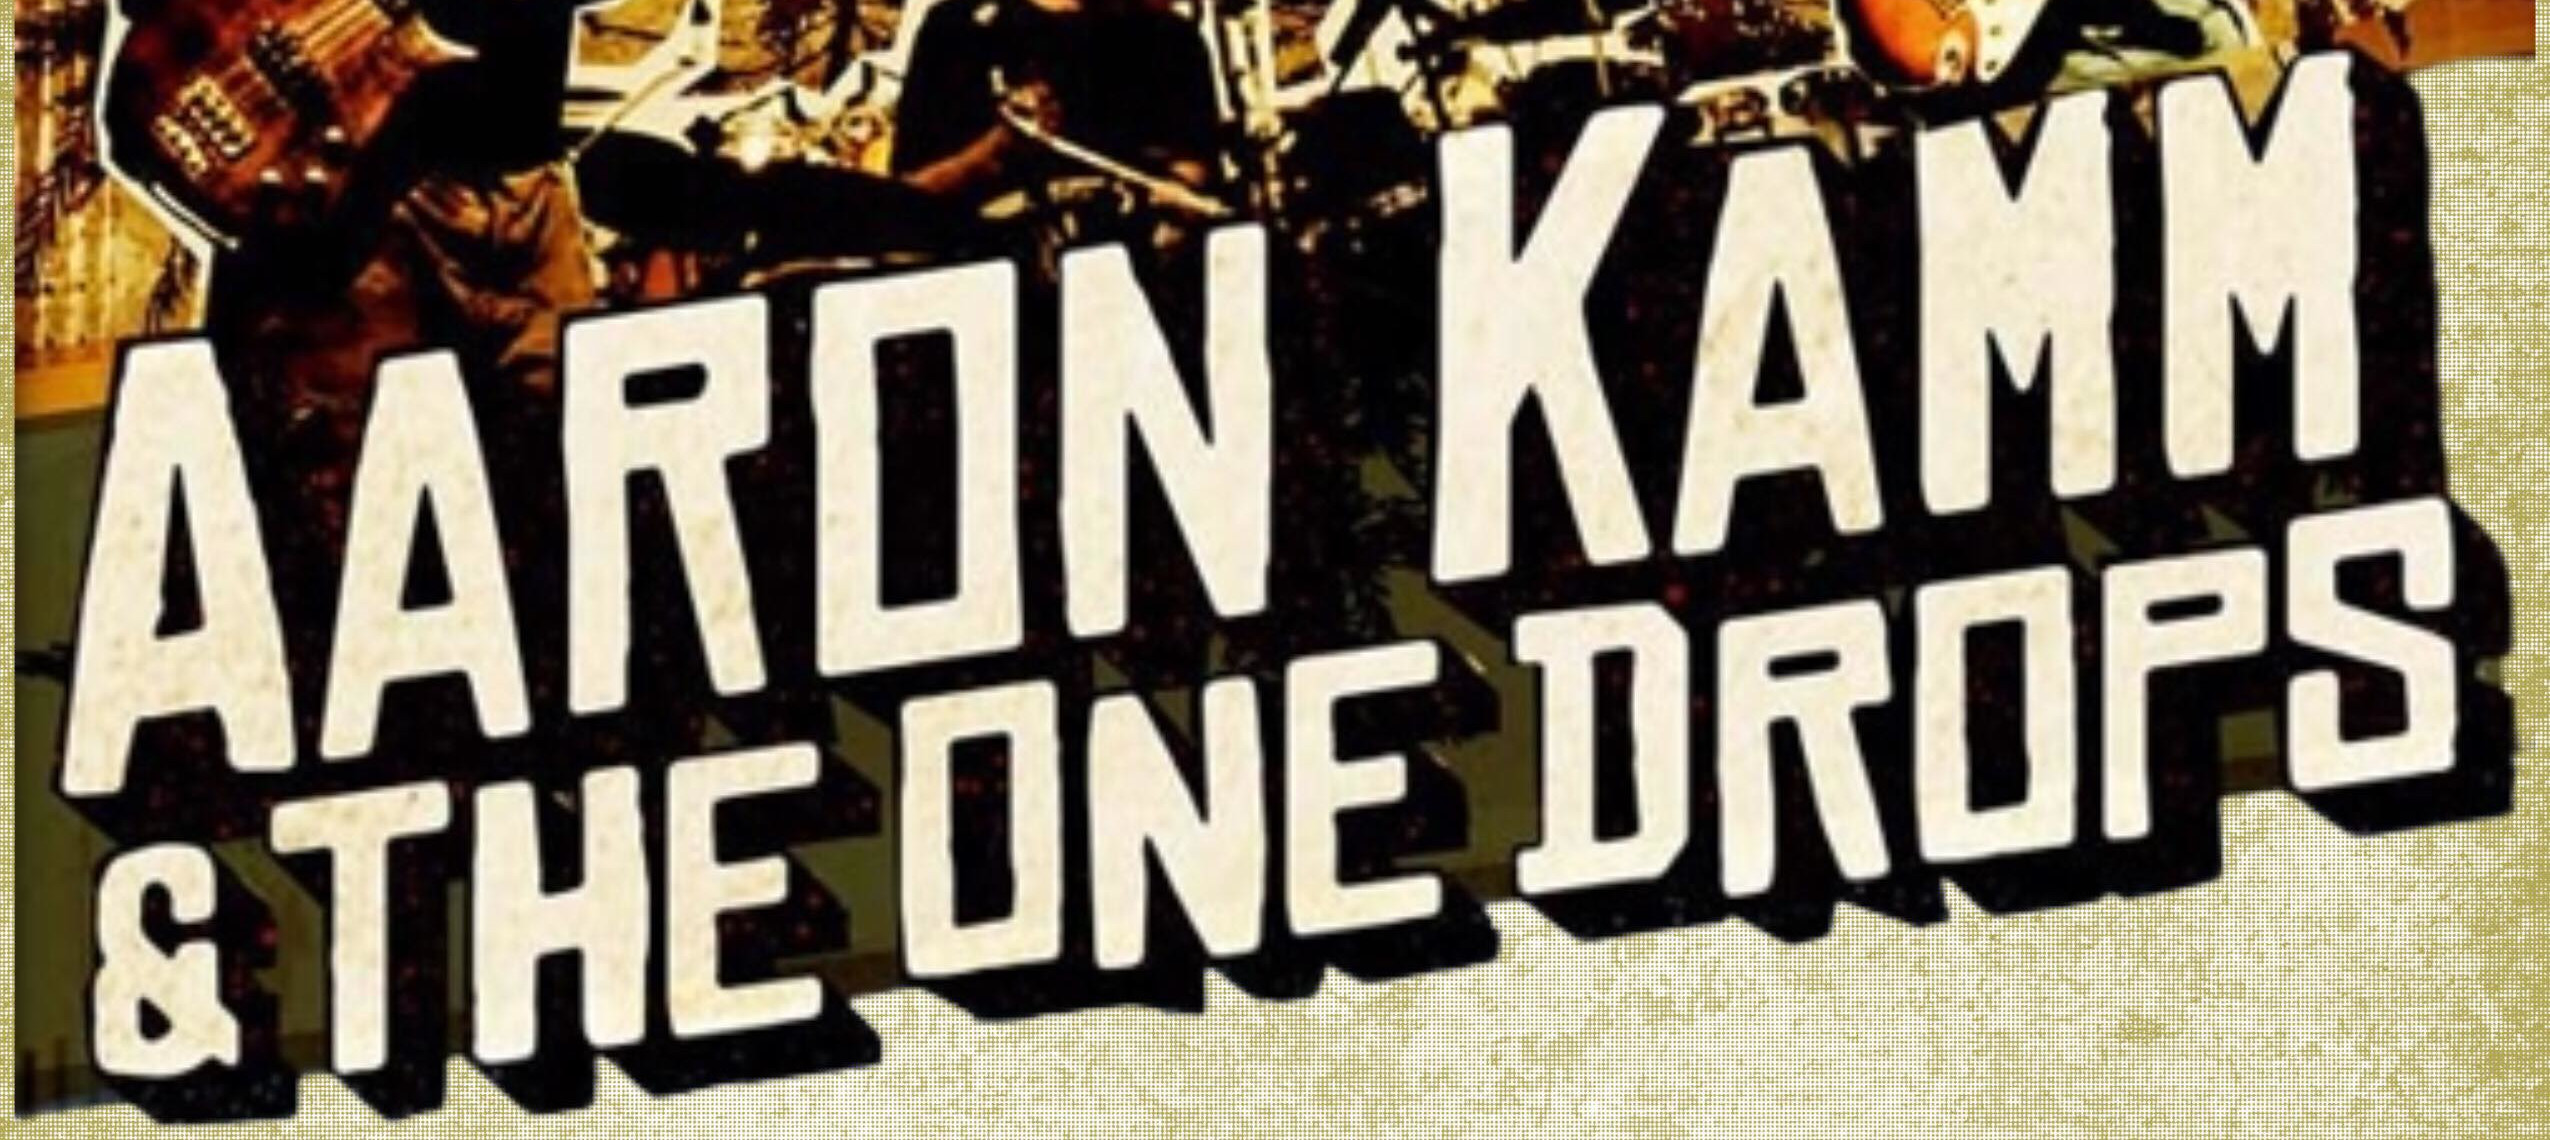 AARON KAMM & THE ONE DROPS